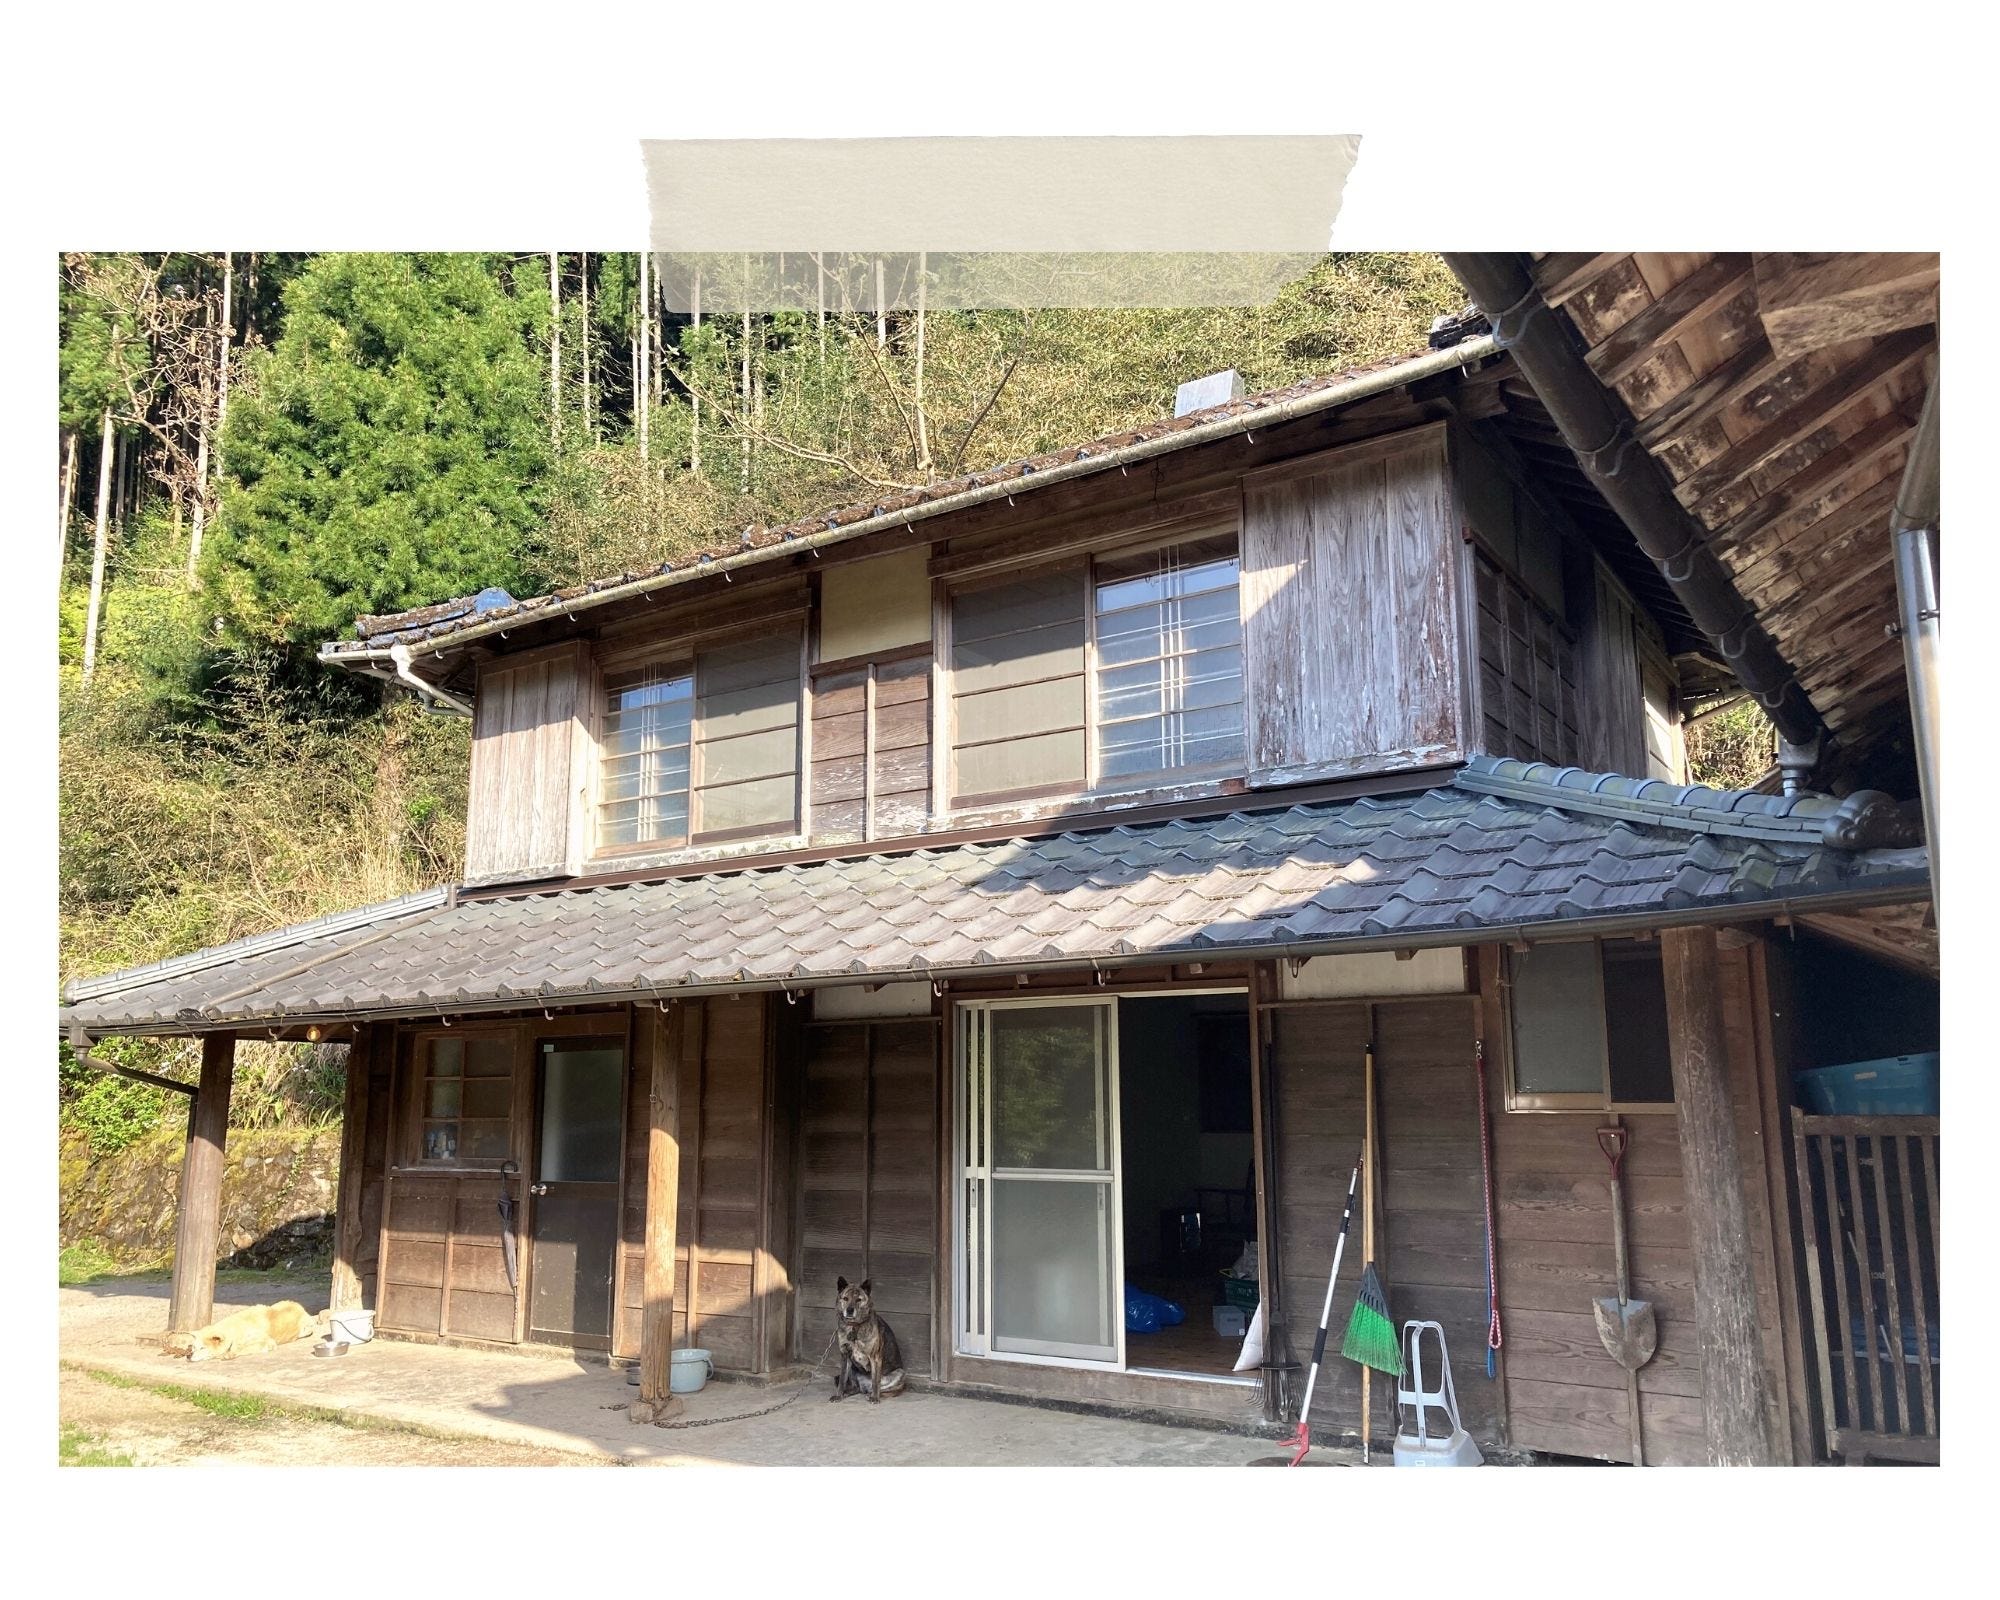 Living in an old Japanese-style house - by Kana Chan